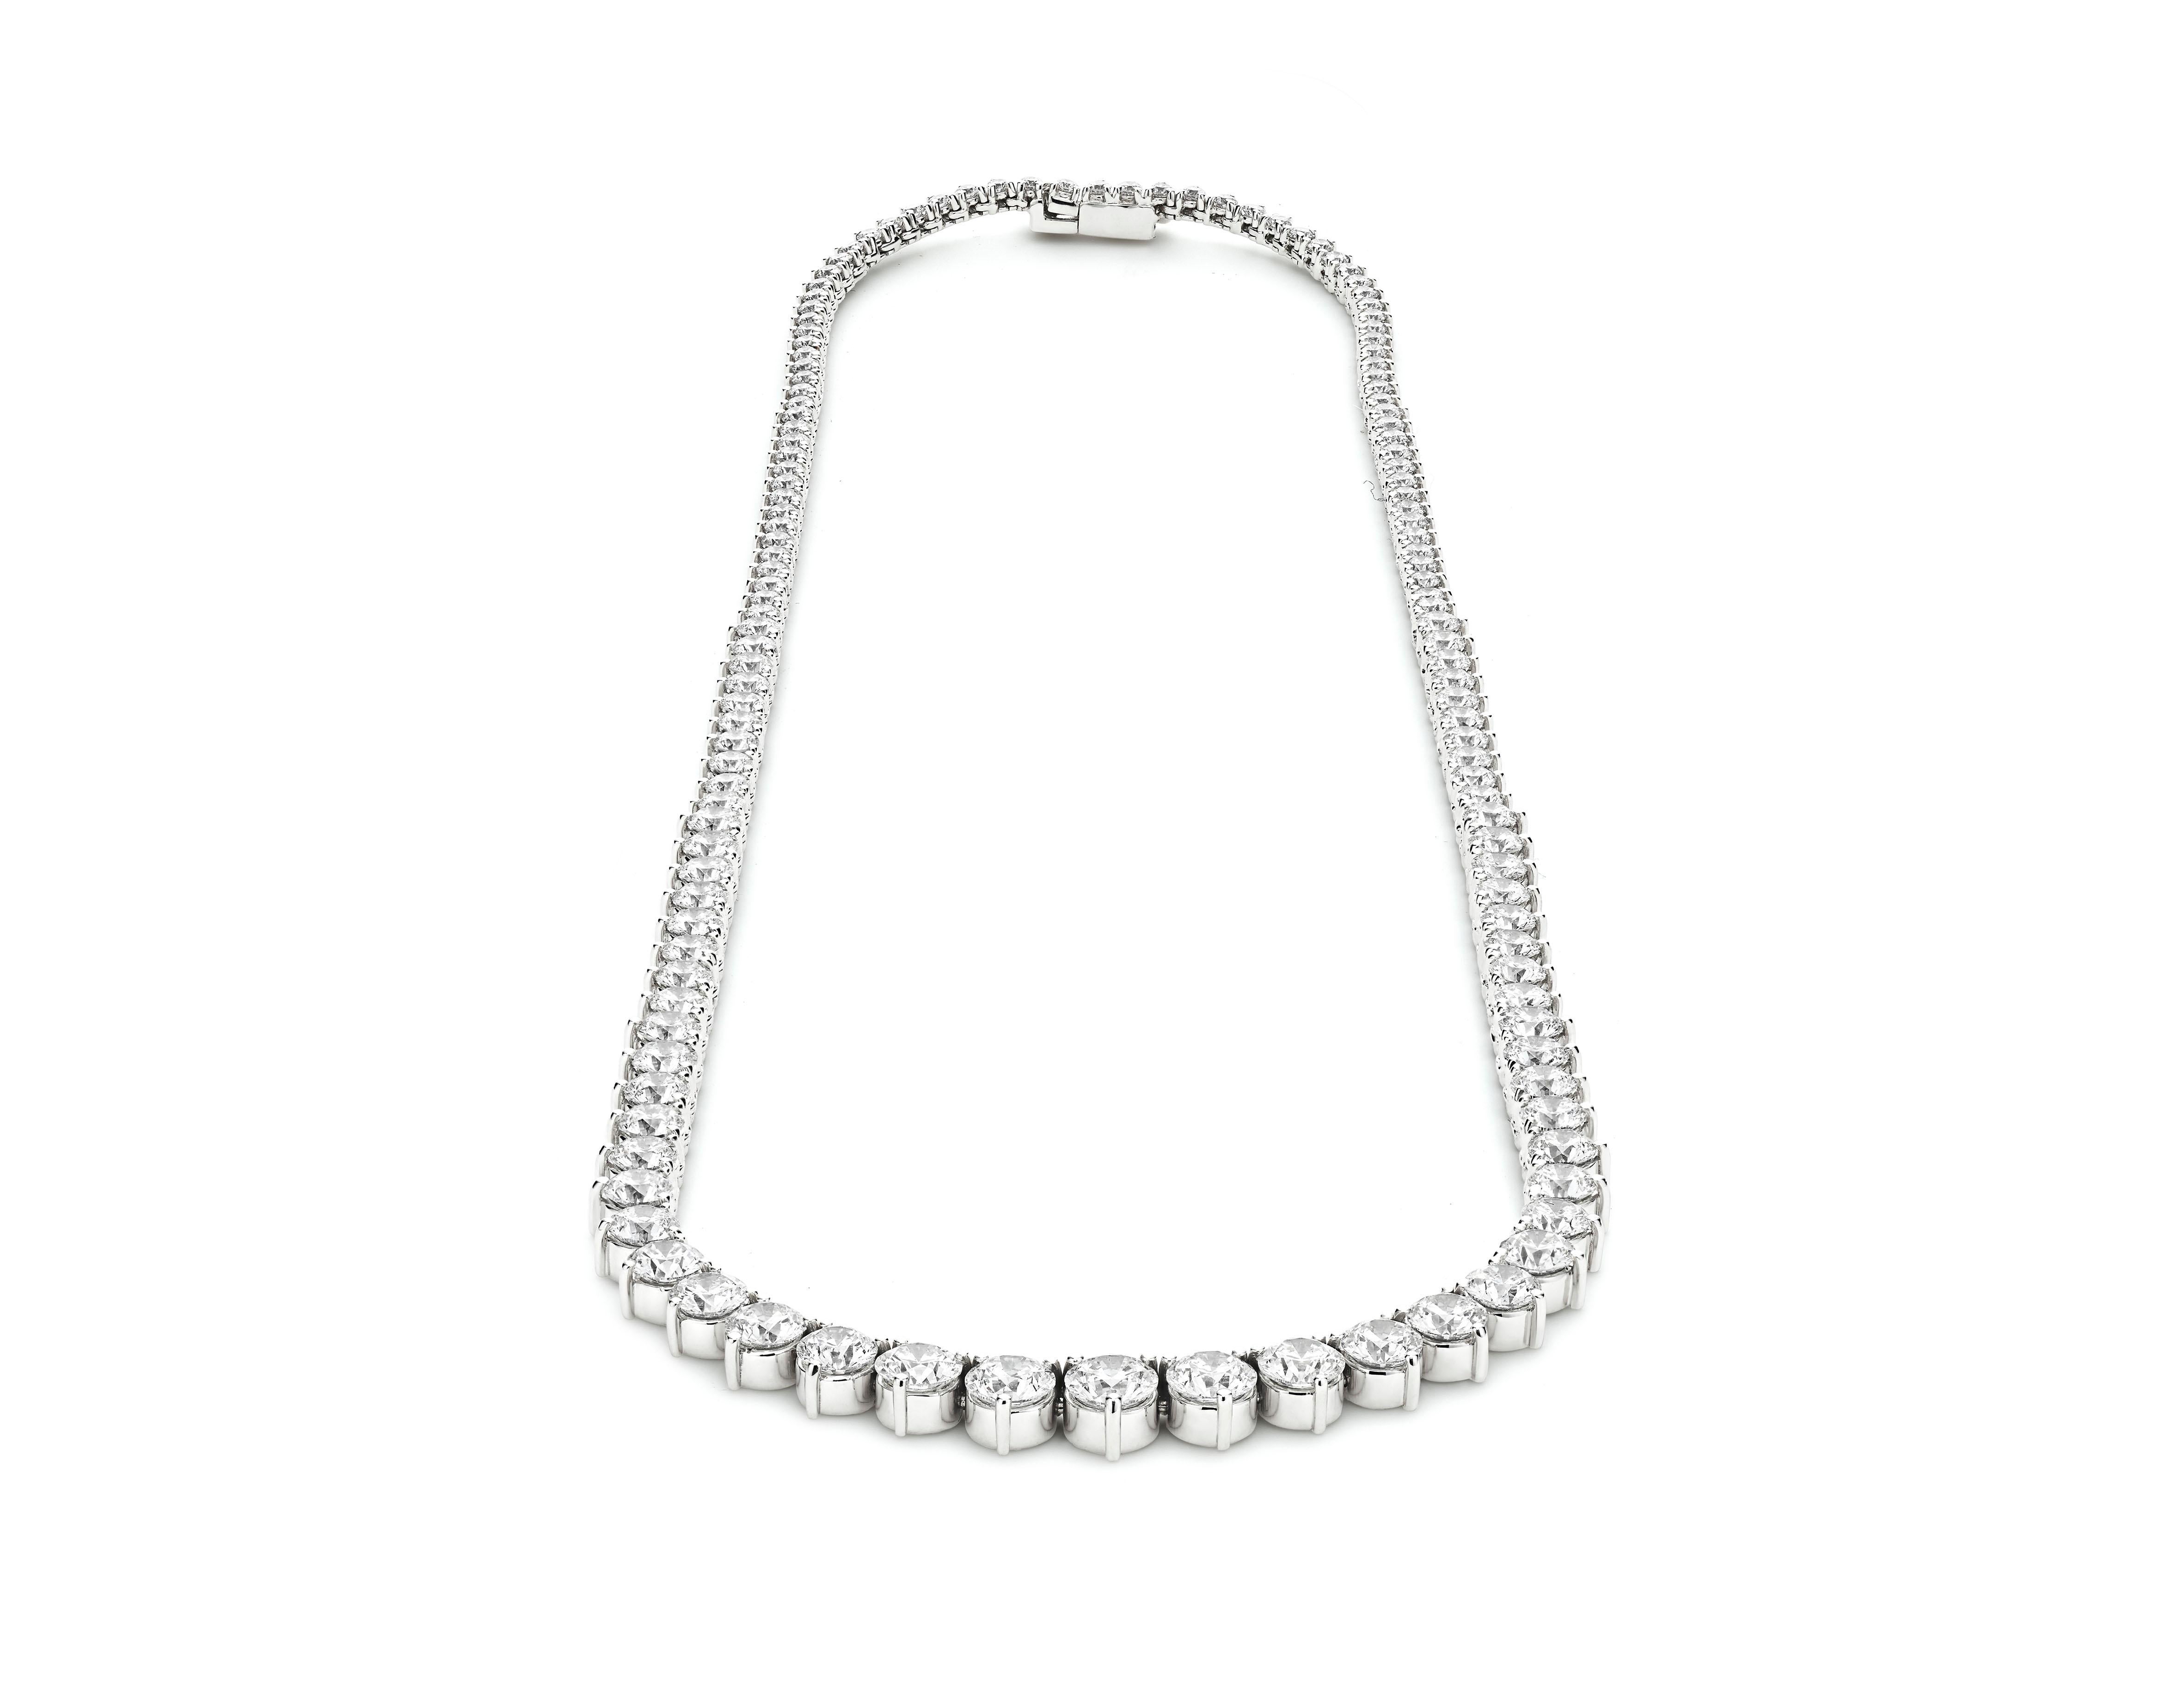 This exquisite Riviera tennis necklace boasts a total of 23 carats of dazzling diamonds. The centerpiece of this stunning piece is a prominent 0.70-carat diamond that captures the light beautifully. 

Each diamond is meticulously set in a degradé